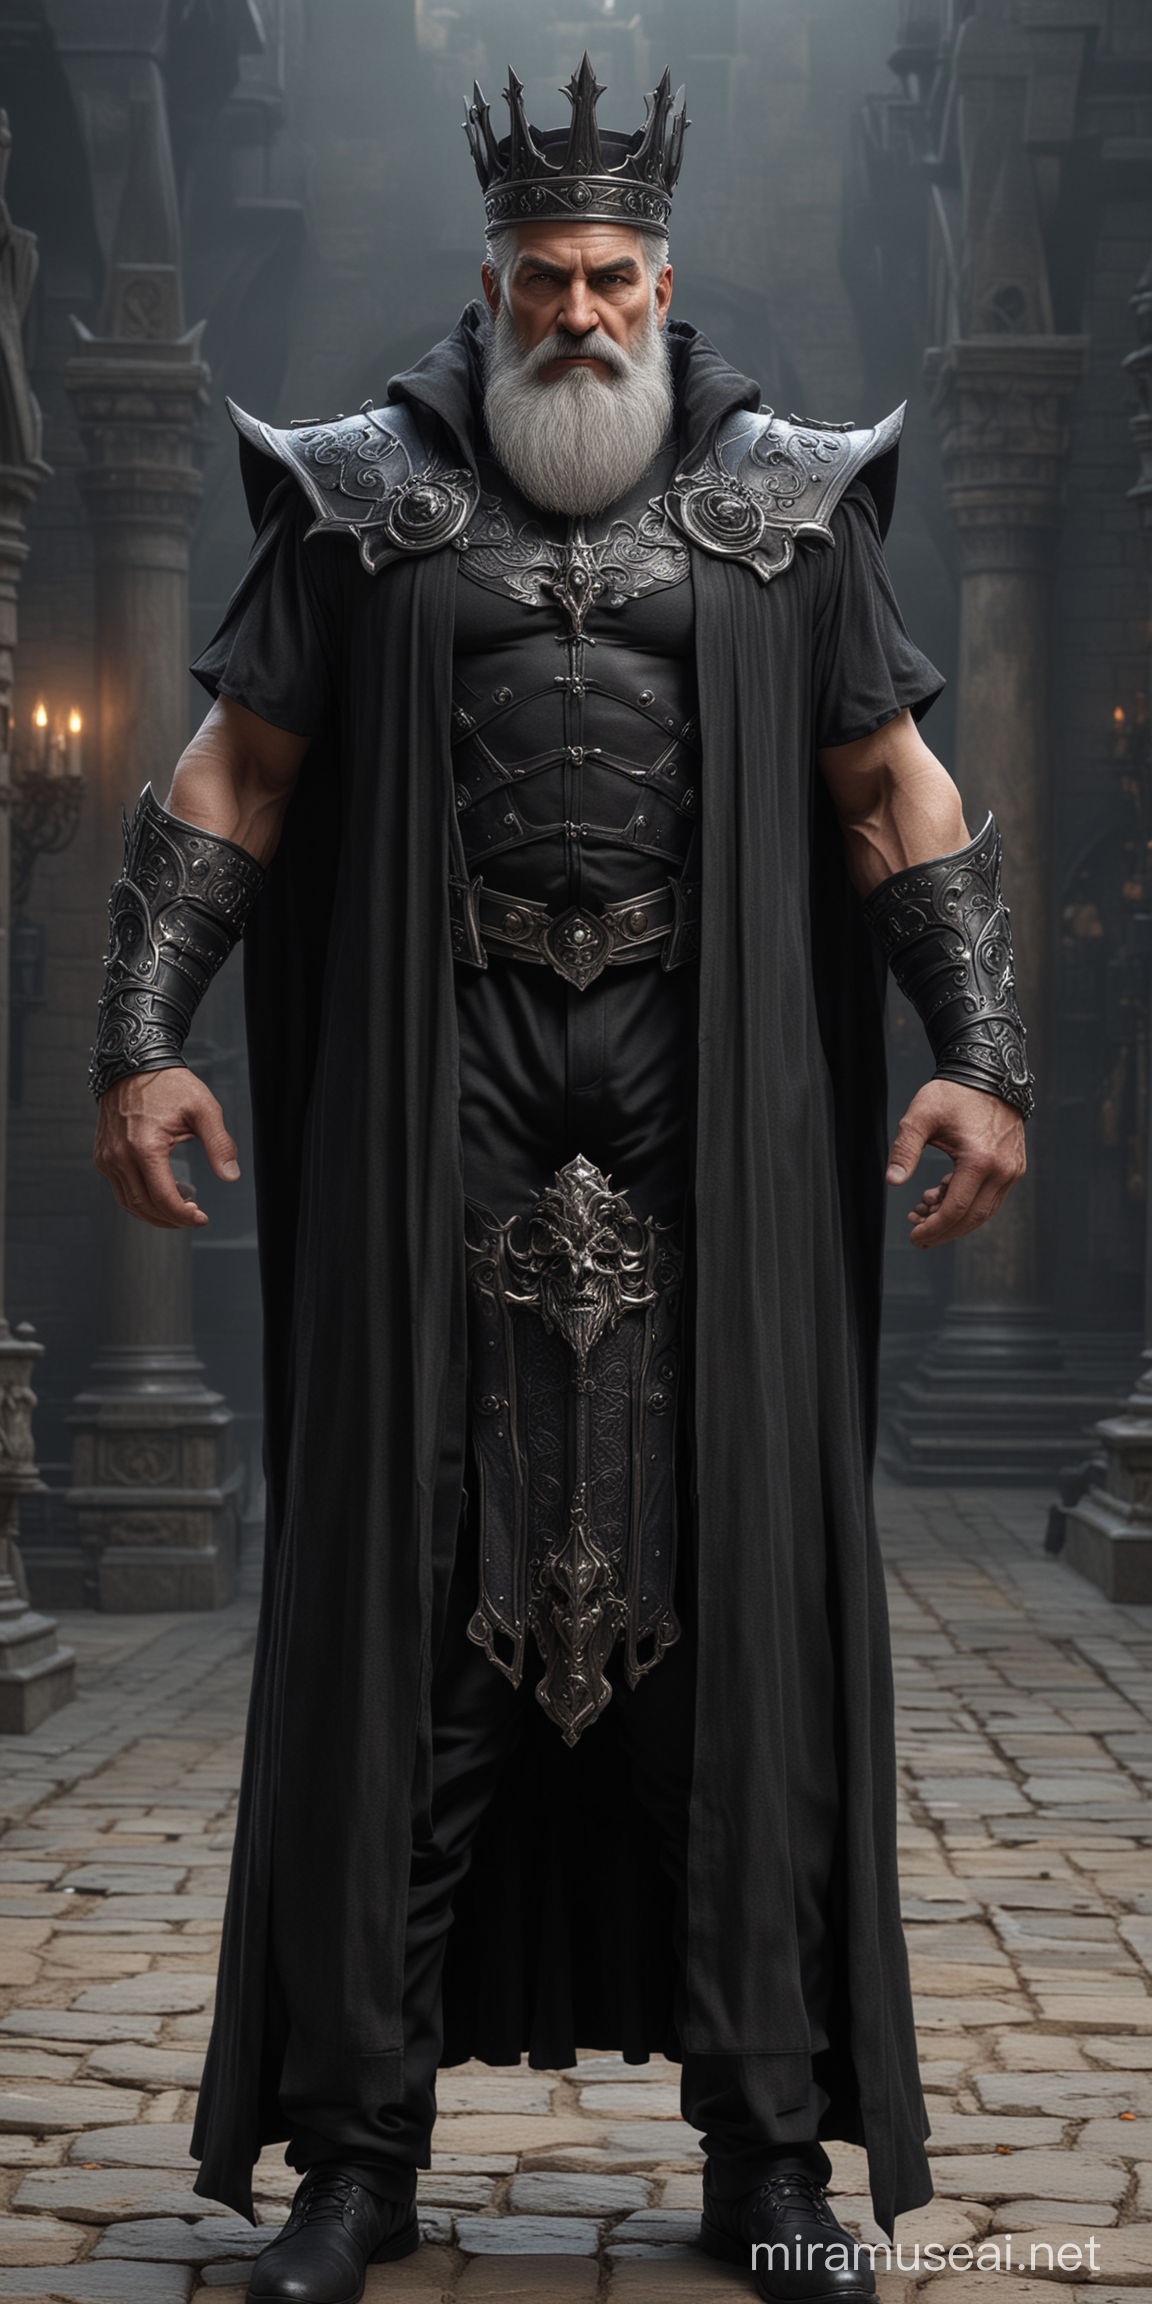 Powerful Dark Lord King Sorcerer with Muscular Physique in Black Crown